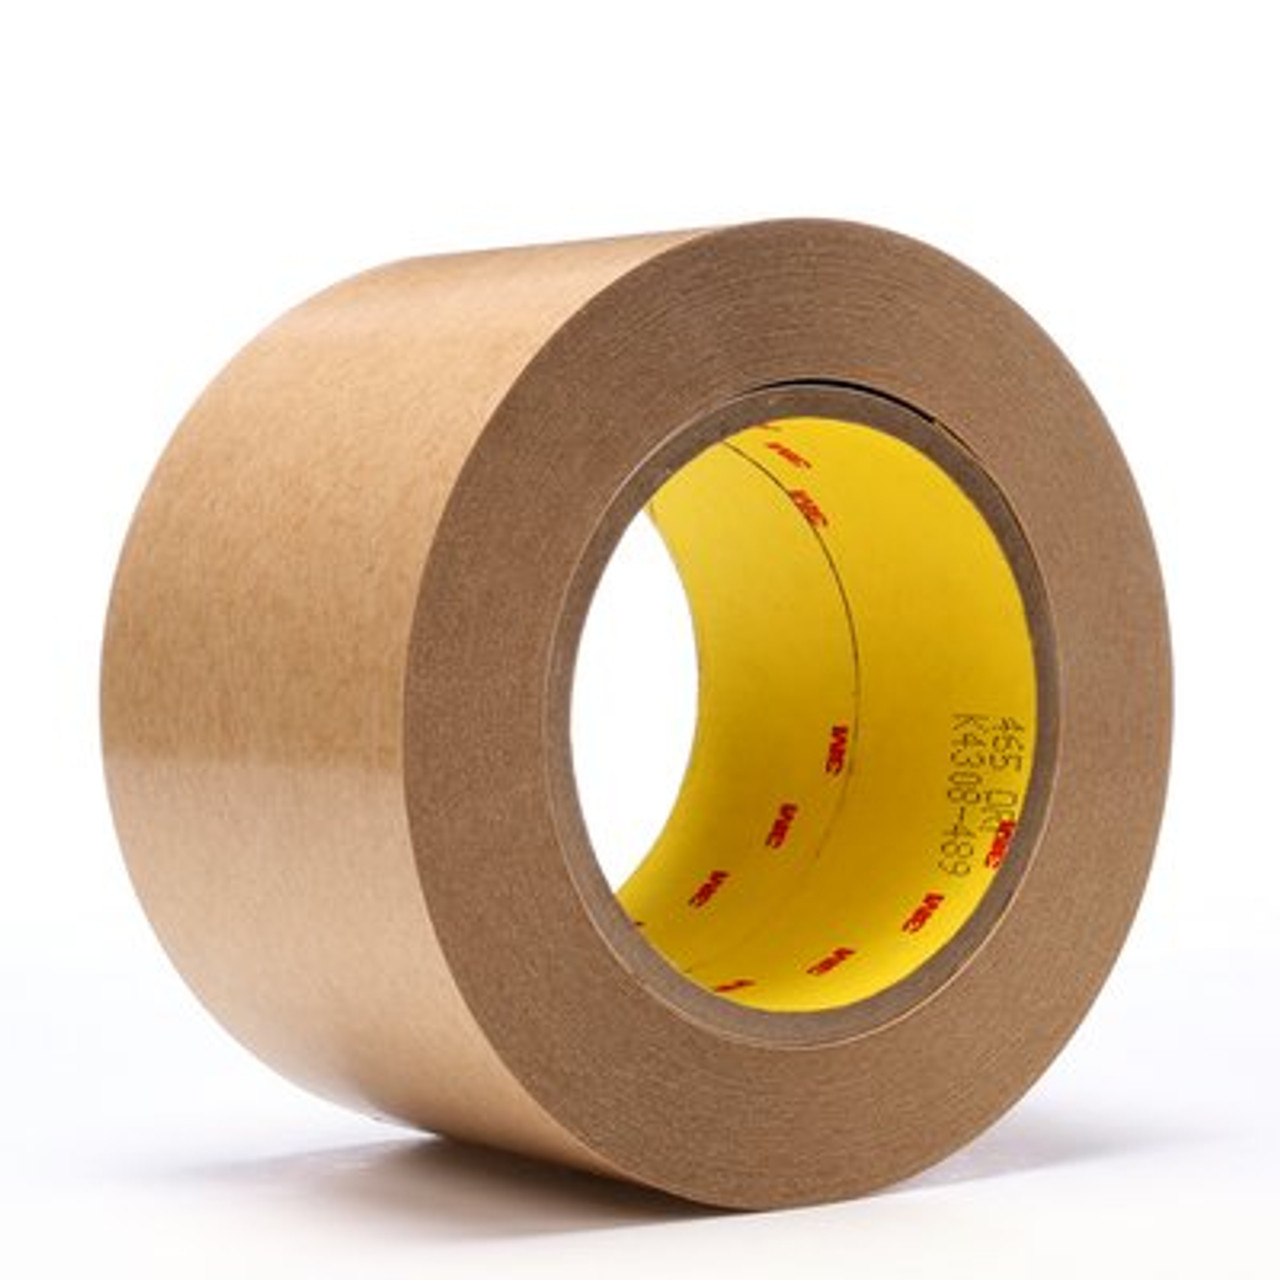 3M™ Adhesive Transfer Tape 465 Clear, 3 in x 60 yd 2.0 mil